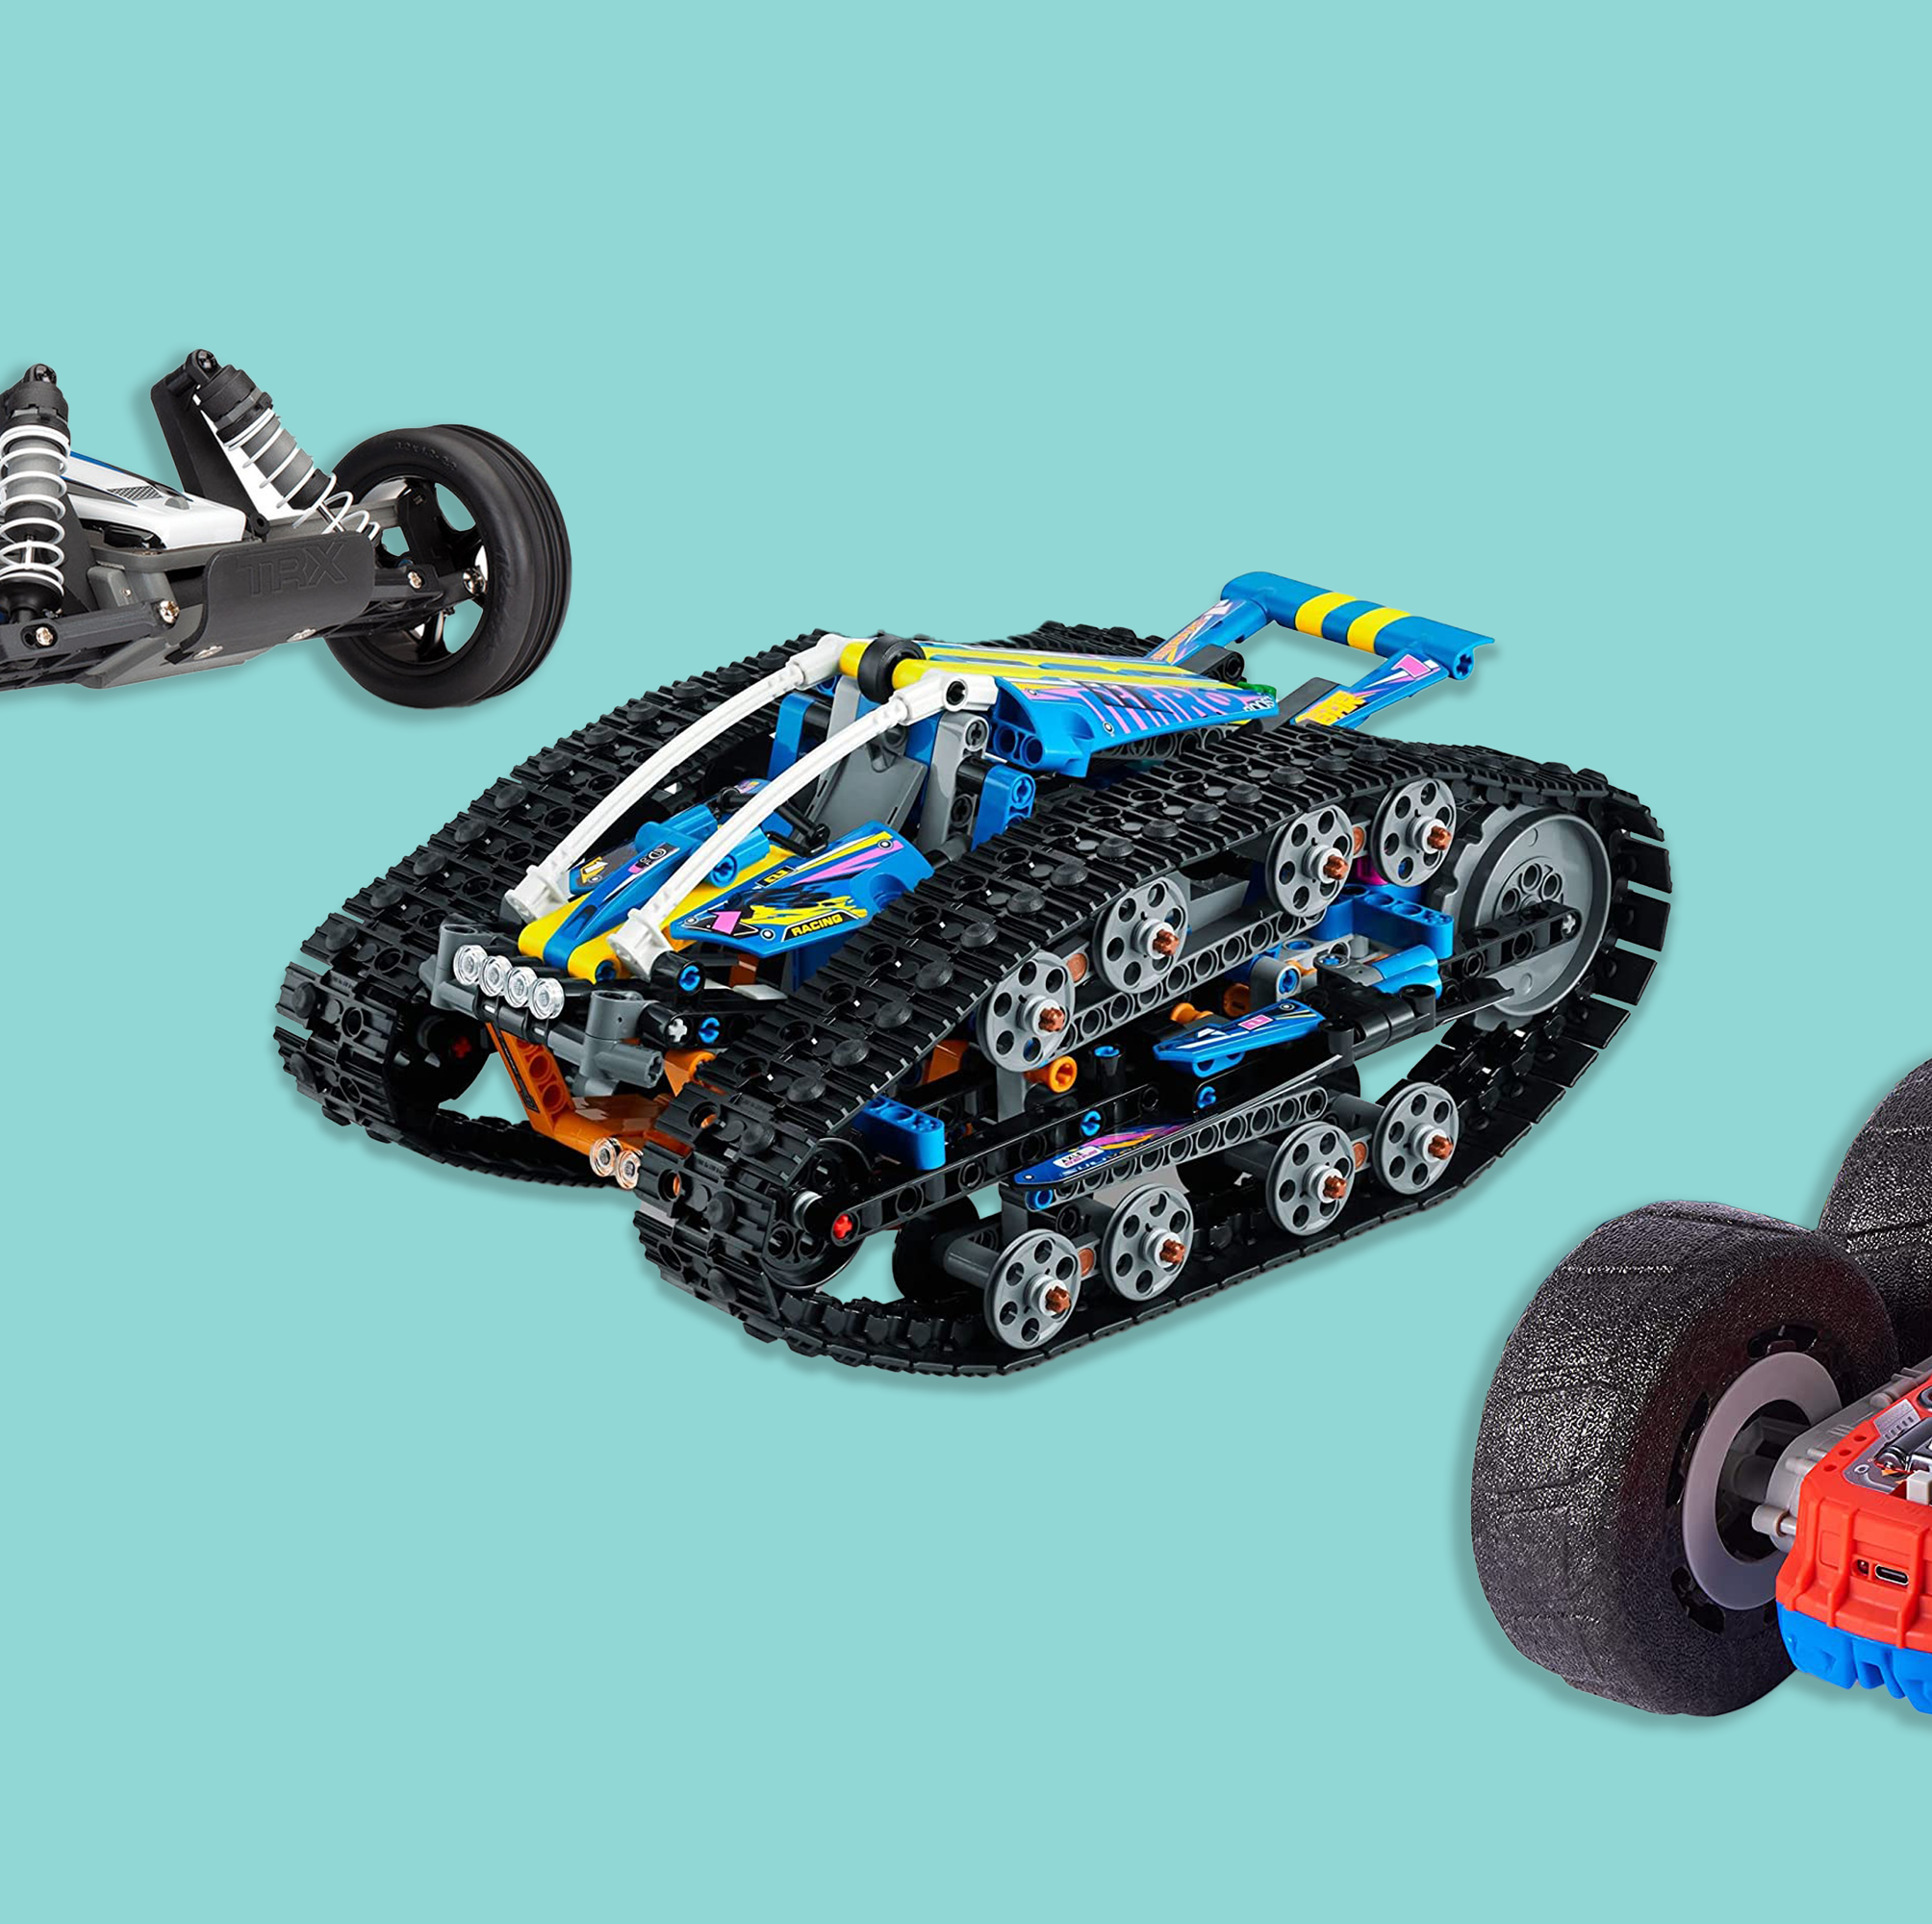 10 Best Remote Control Cars of 2022